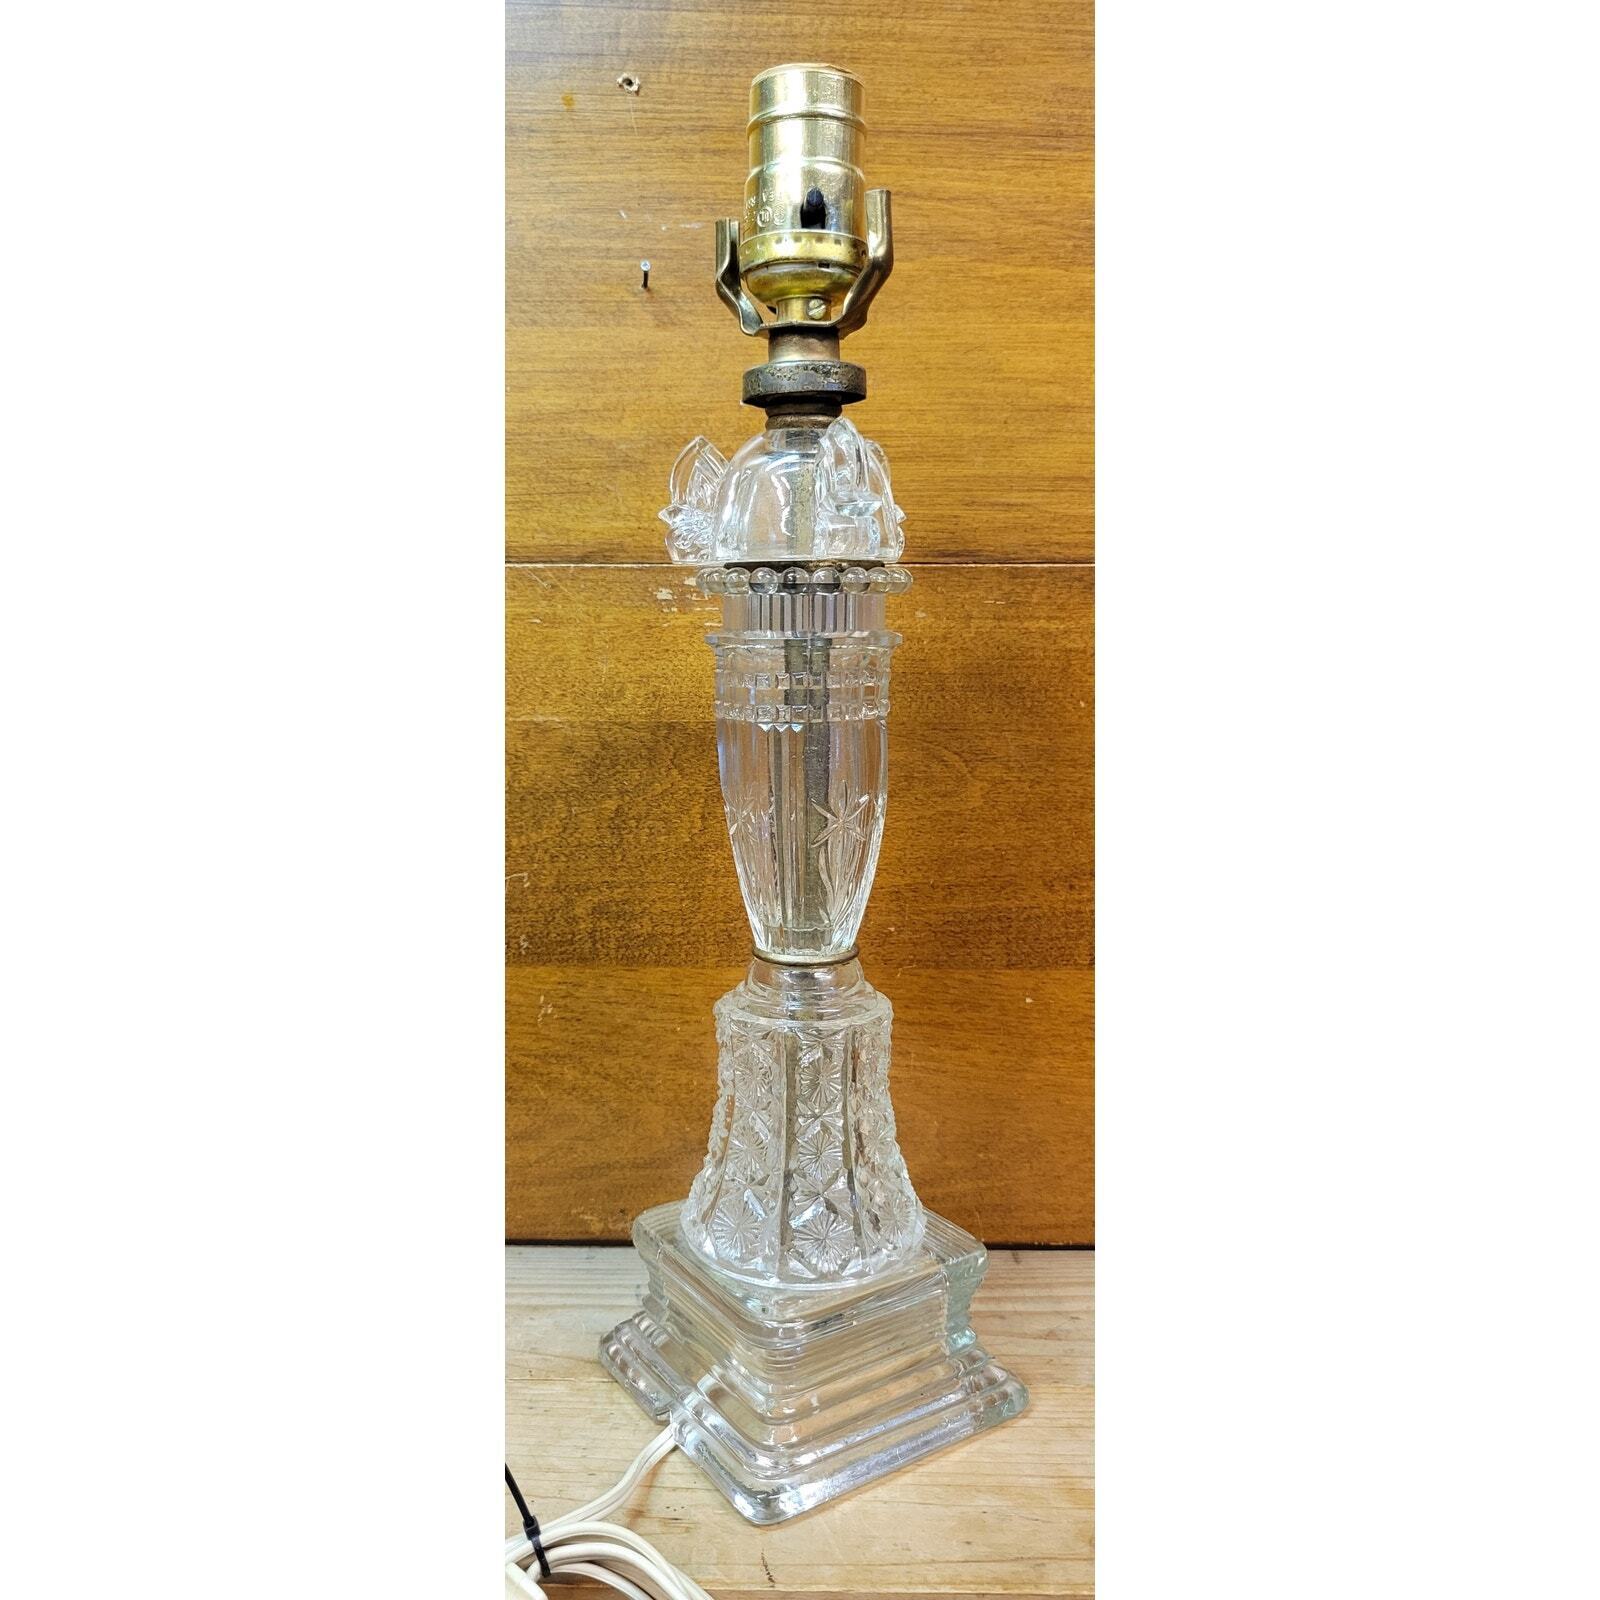 Rare Antique 1910-30's Art Deco Pressed Glass Table Lamp - Unknown Makeer